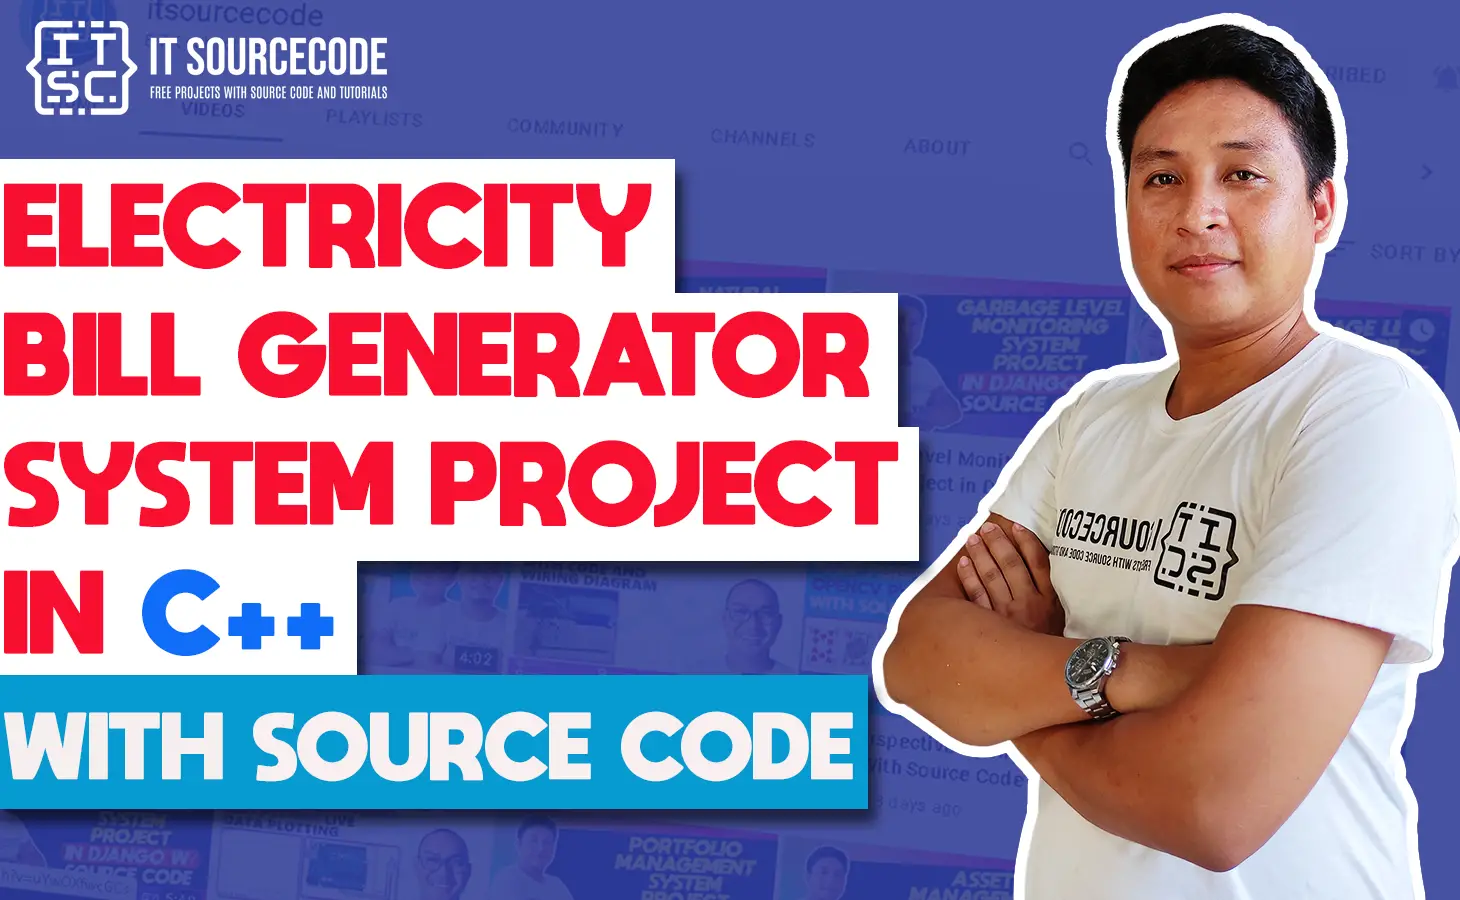 Electricity Bill Generator System Project in C++ with Source Code